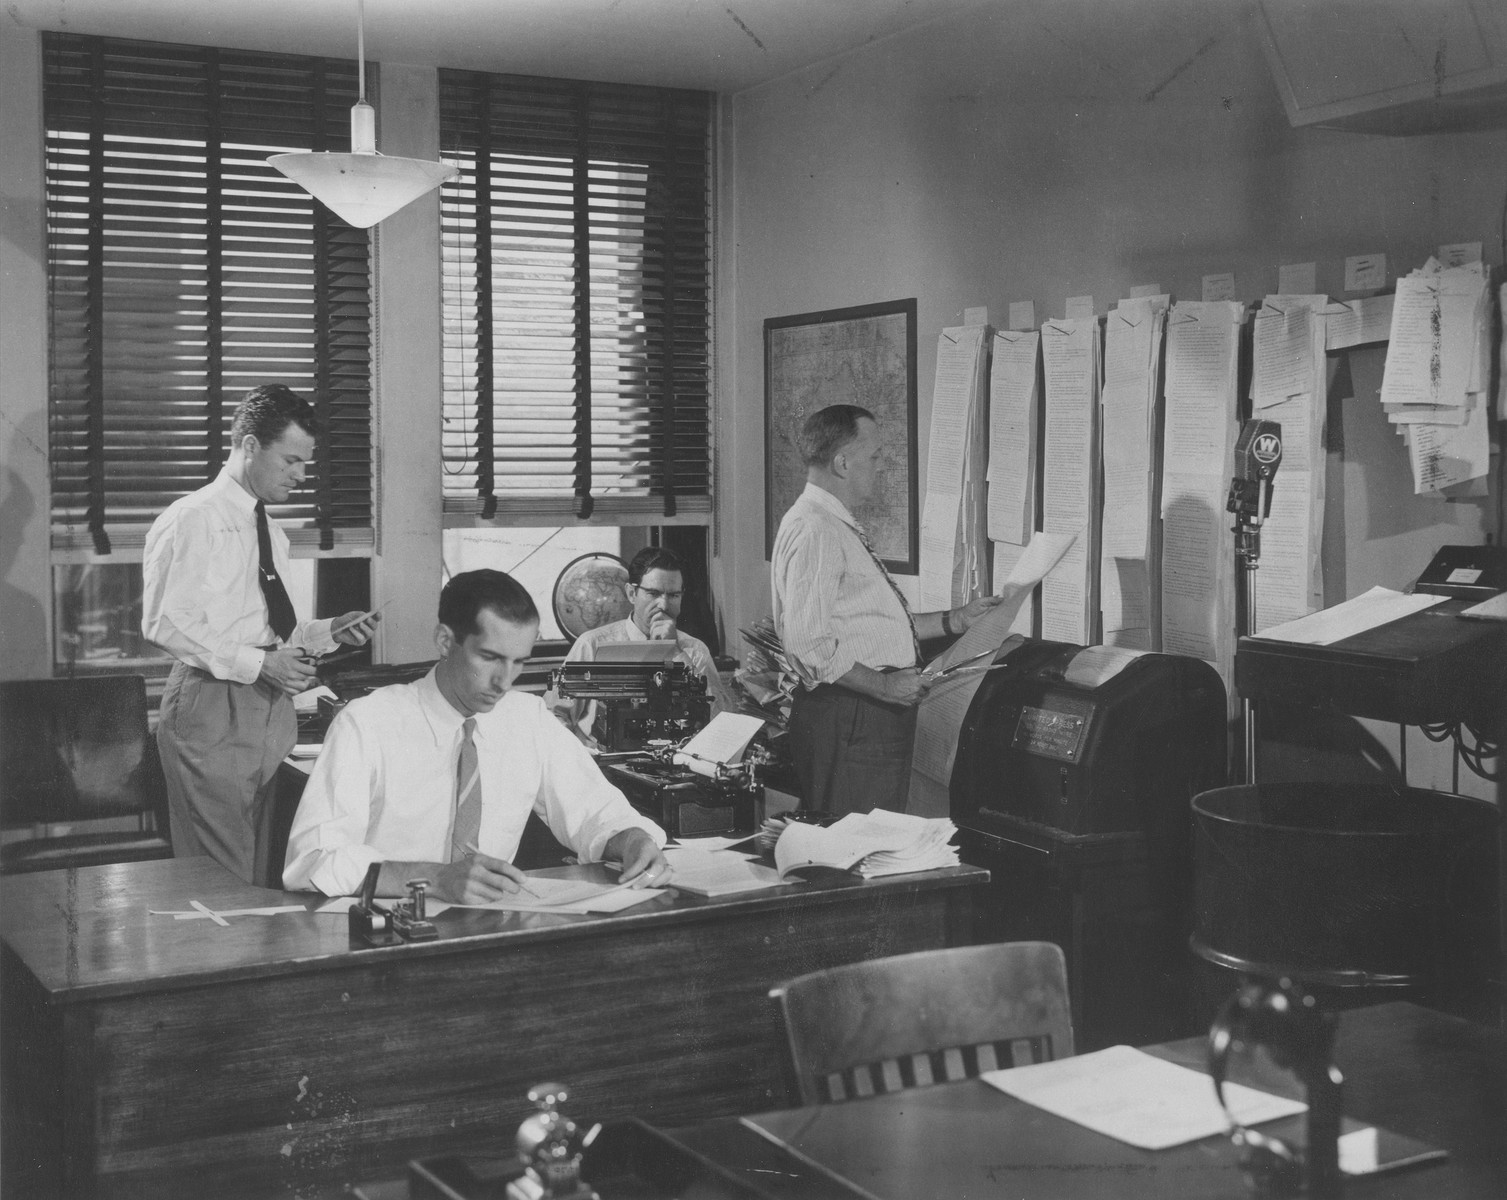 Teleprinter room in a large U. S. broadcasting station.  Here news from all parts of the world is received, sorted, edited, and prepared for broadcasting.